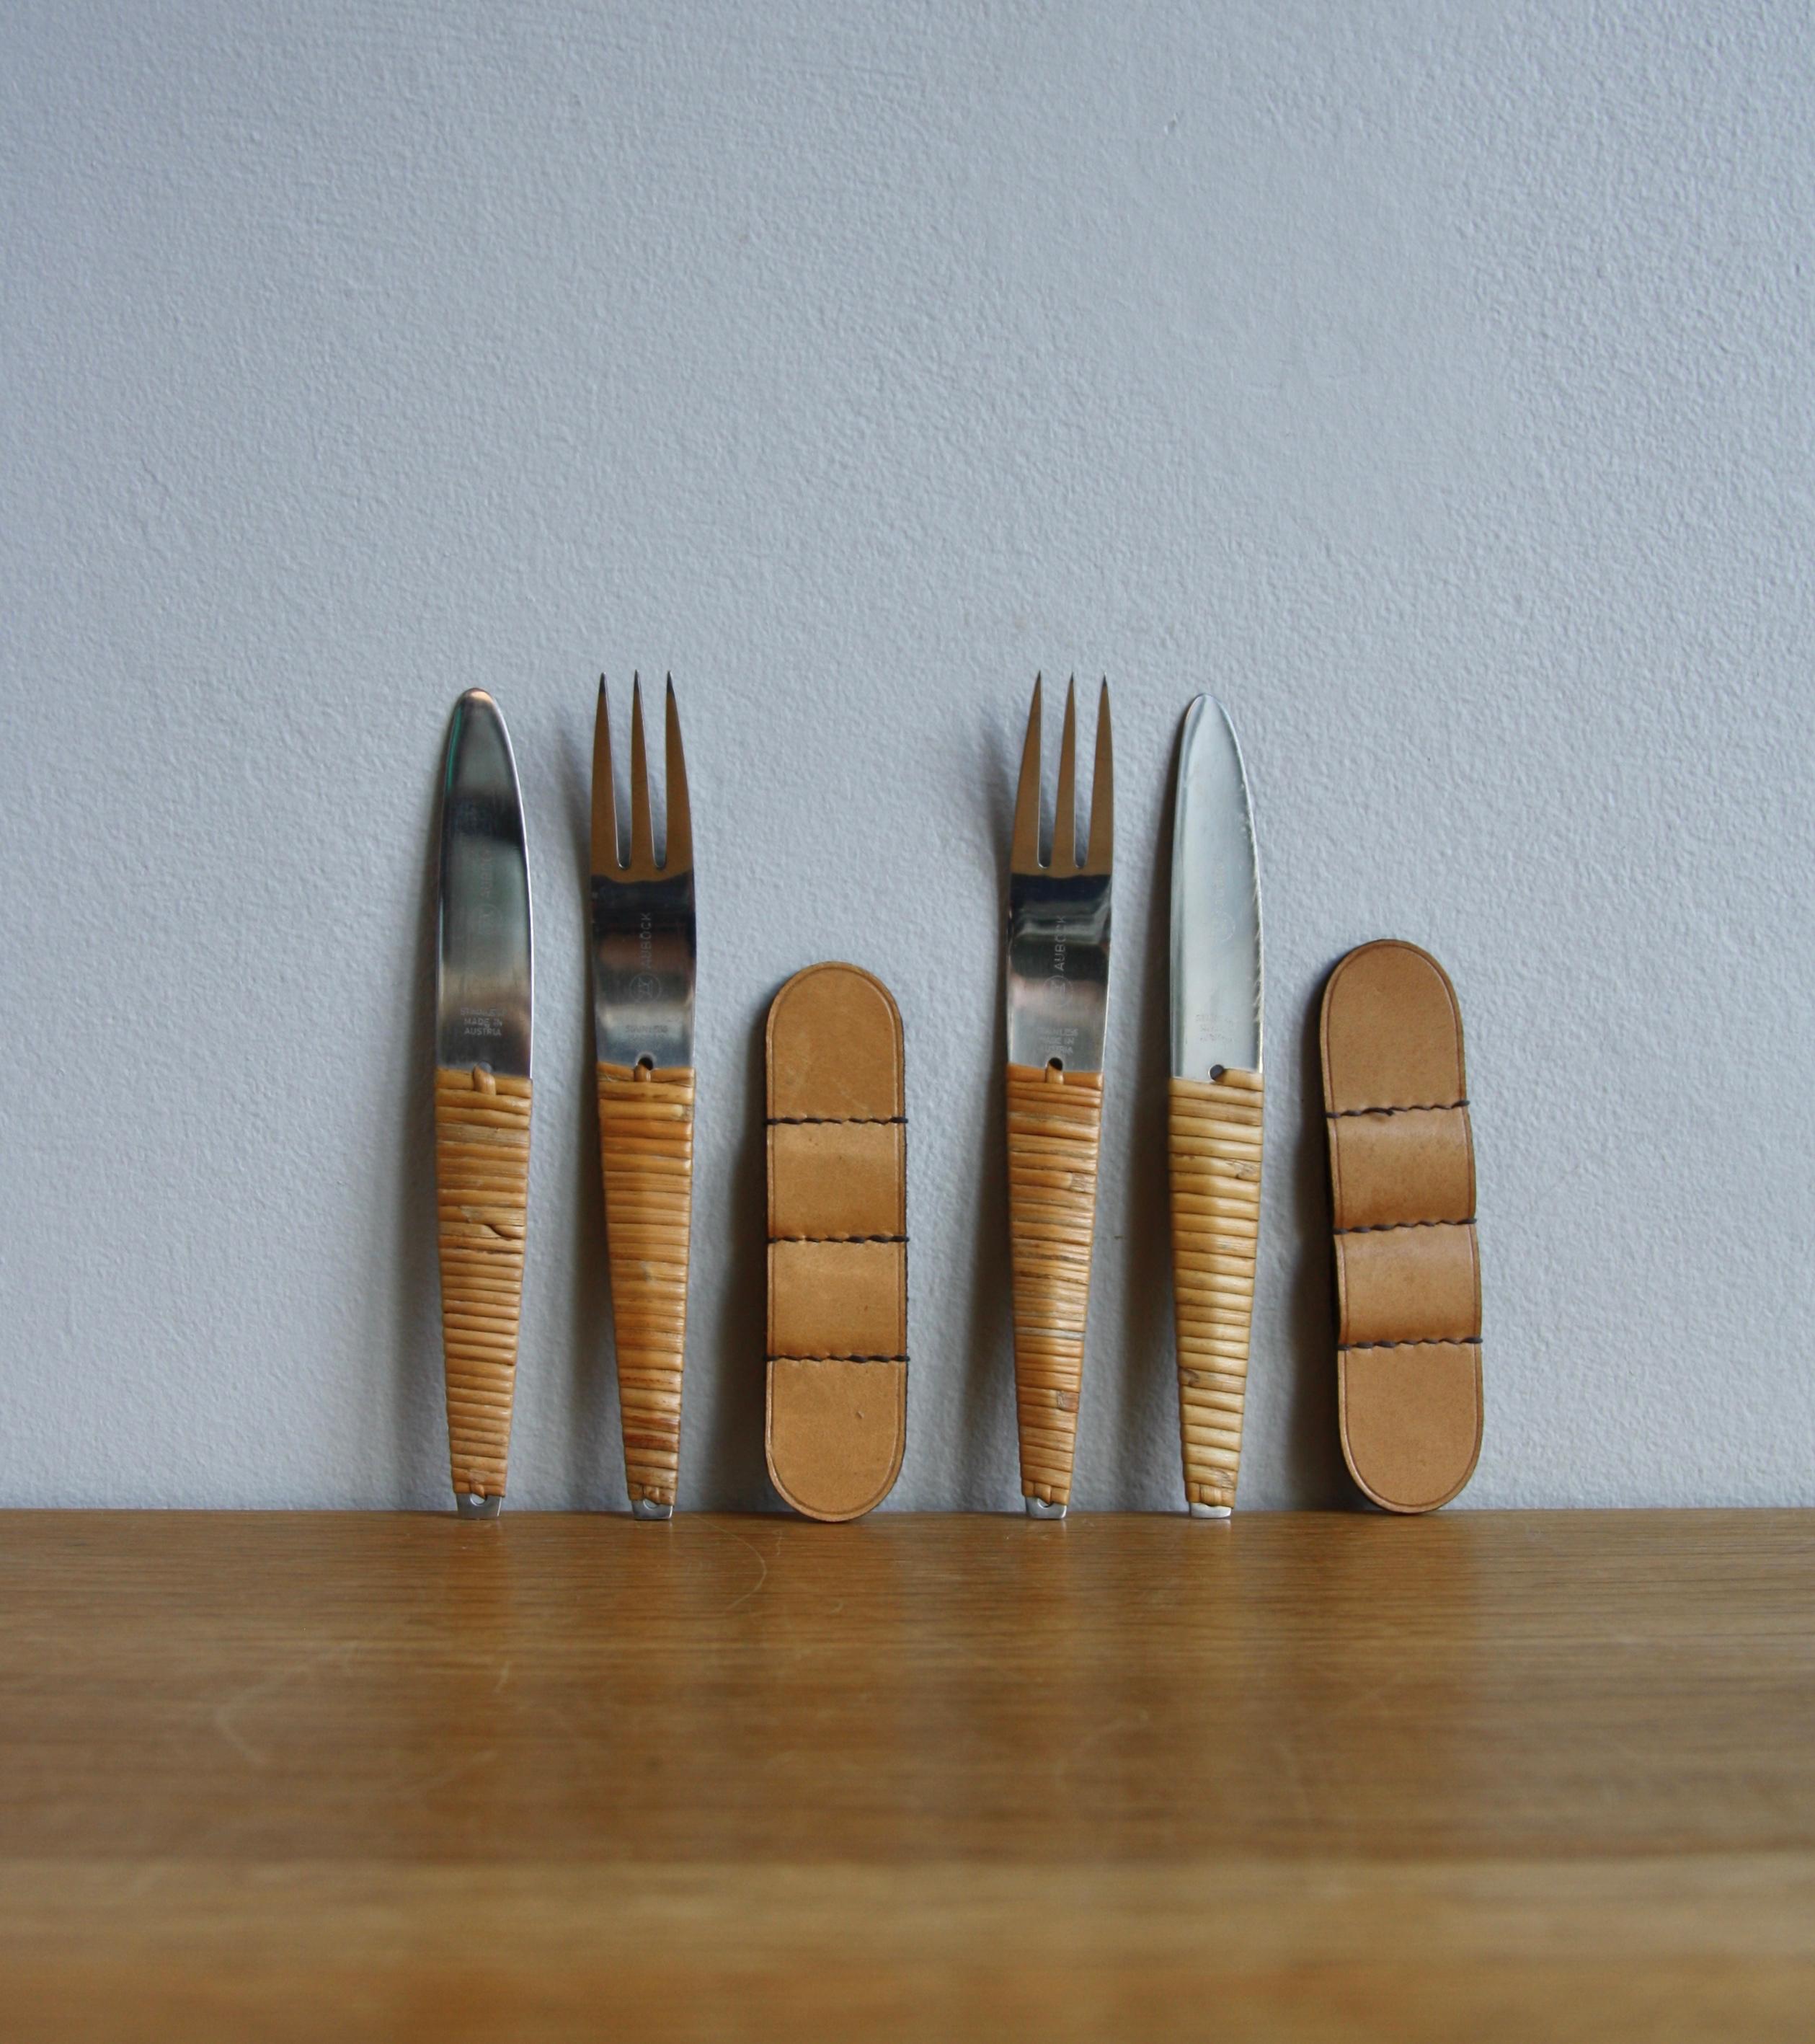 Two vintage sets of knives and forks, model number #4244, by the Auböck Workshop, Vienna, circa 1950.
The body of the cutlery is made from stainless steel, the handle of each piece is woven with wicker cane. Each set is complete with the original